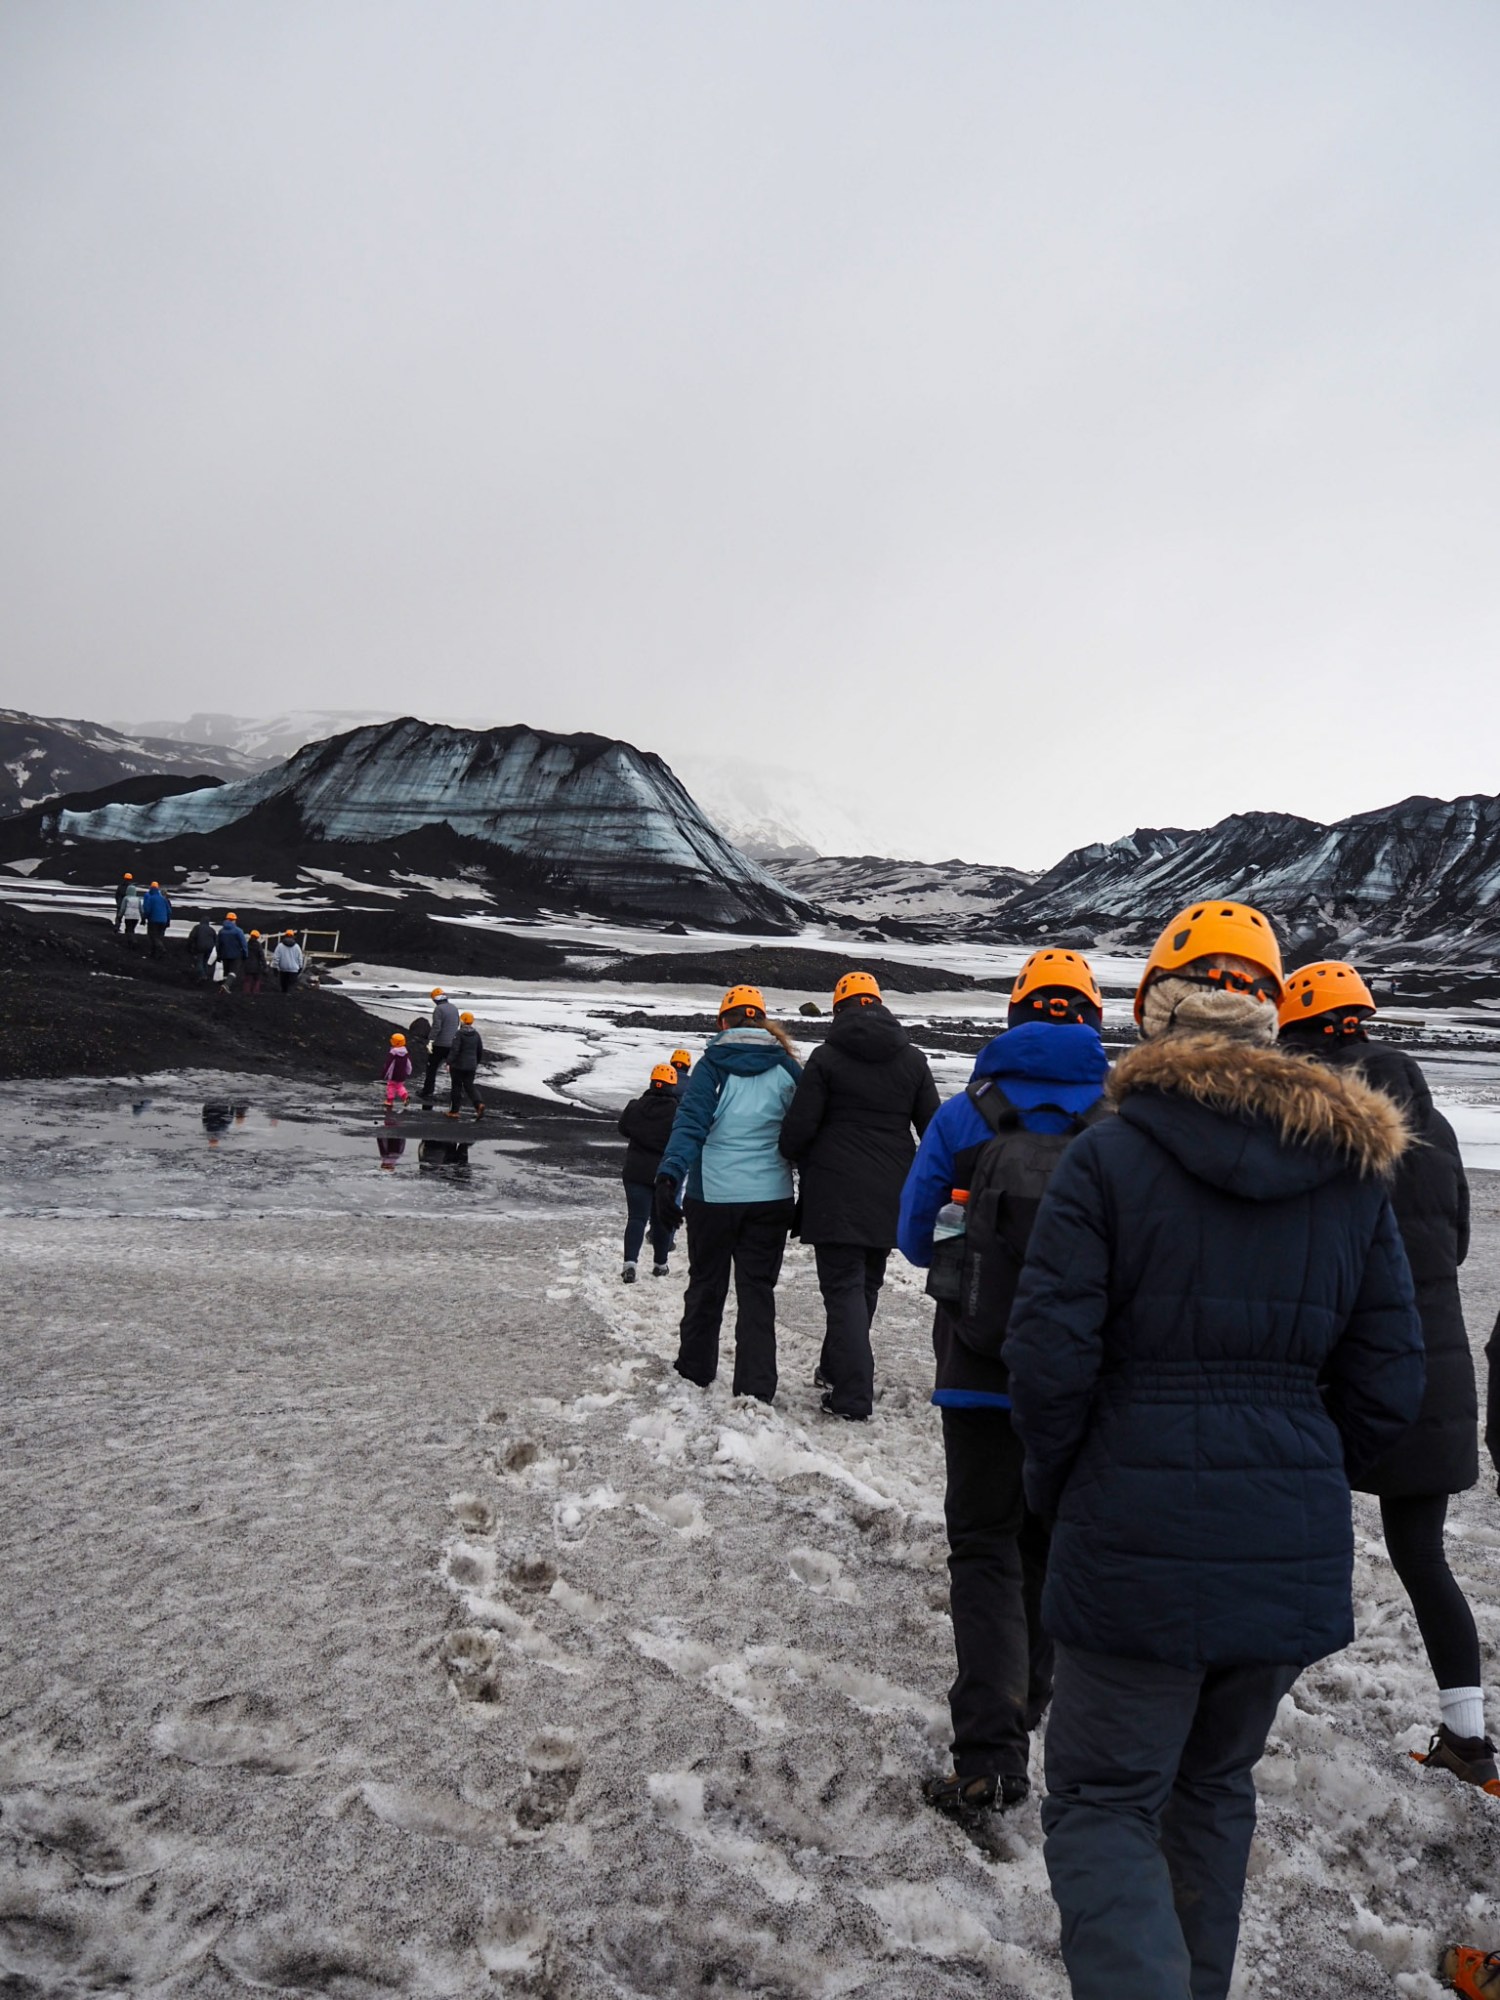 a line of people in orange safety helmets hike across the icy landscape